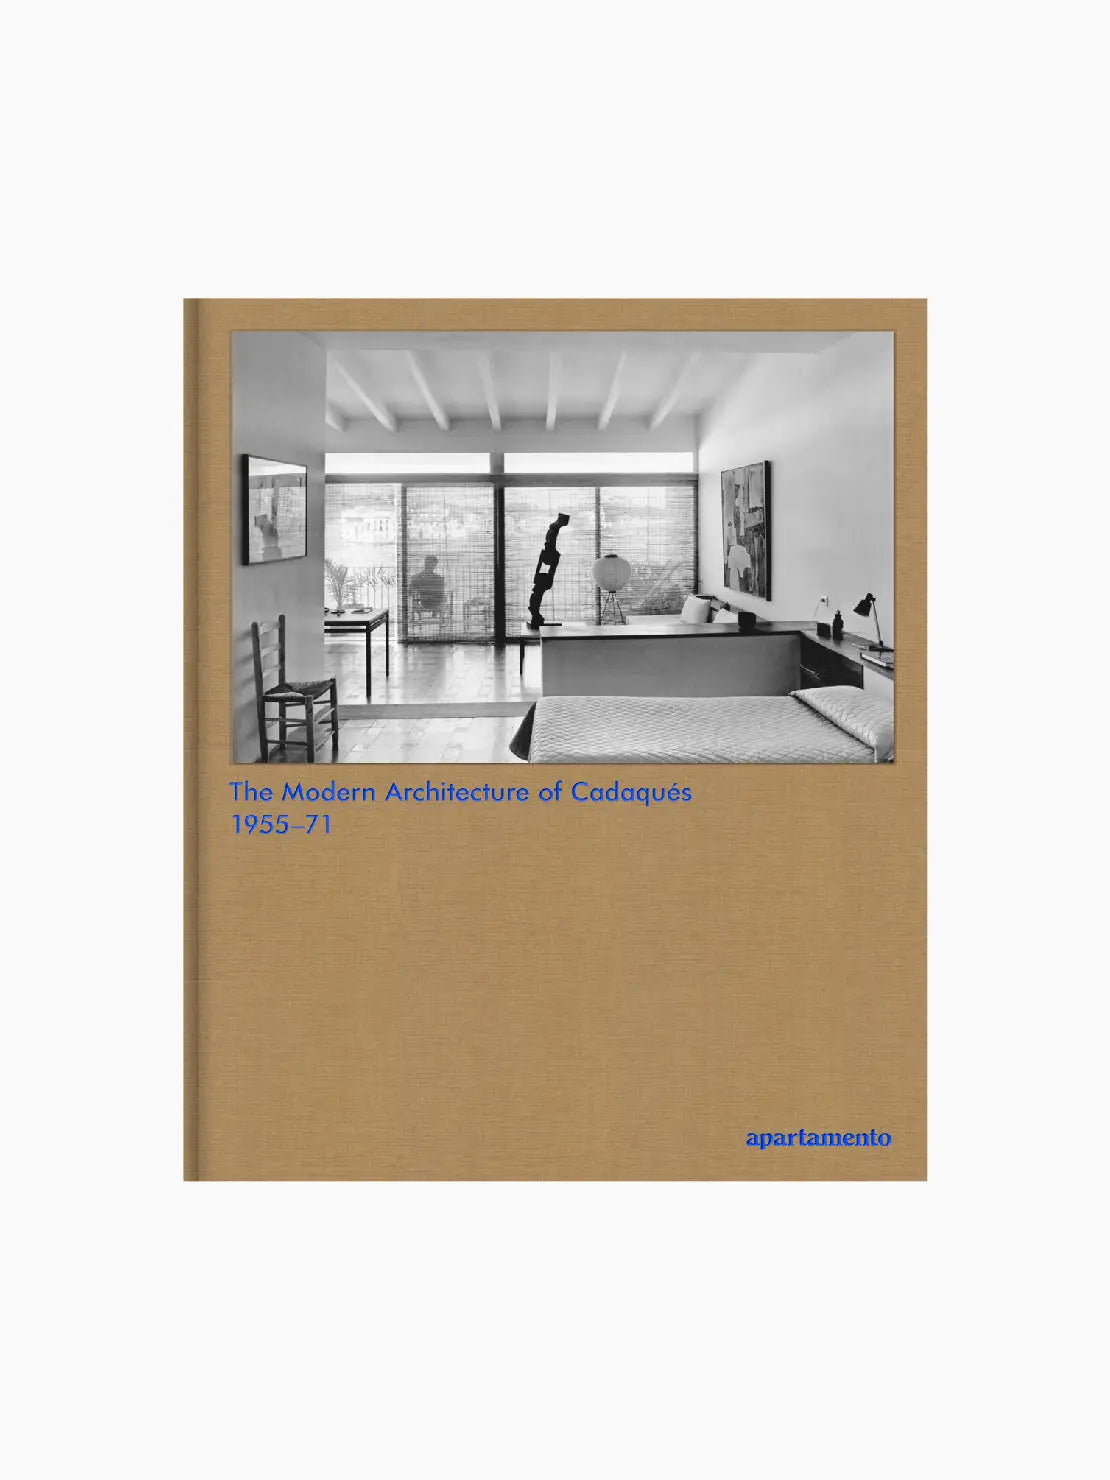 A book cover titled "The Modern Architecture of Cadaqués: 1955–71." The cover features a black and white photograph of a modern, minimalist living space with large windows. Published by Apartamento and available at Bassalstore, this edition resonates with the architectural elegance of nearby Barcelona.